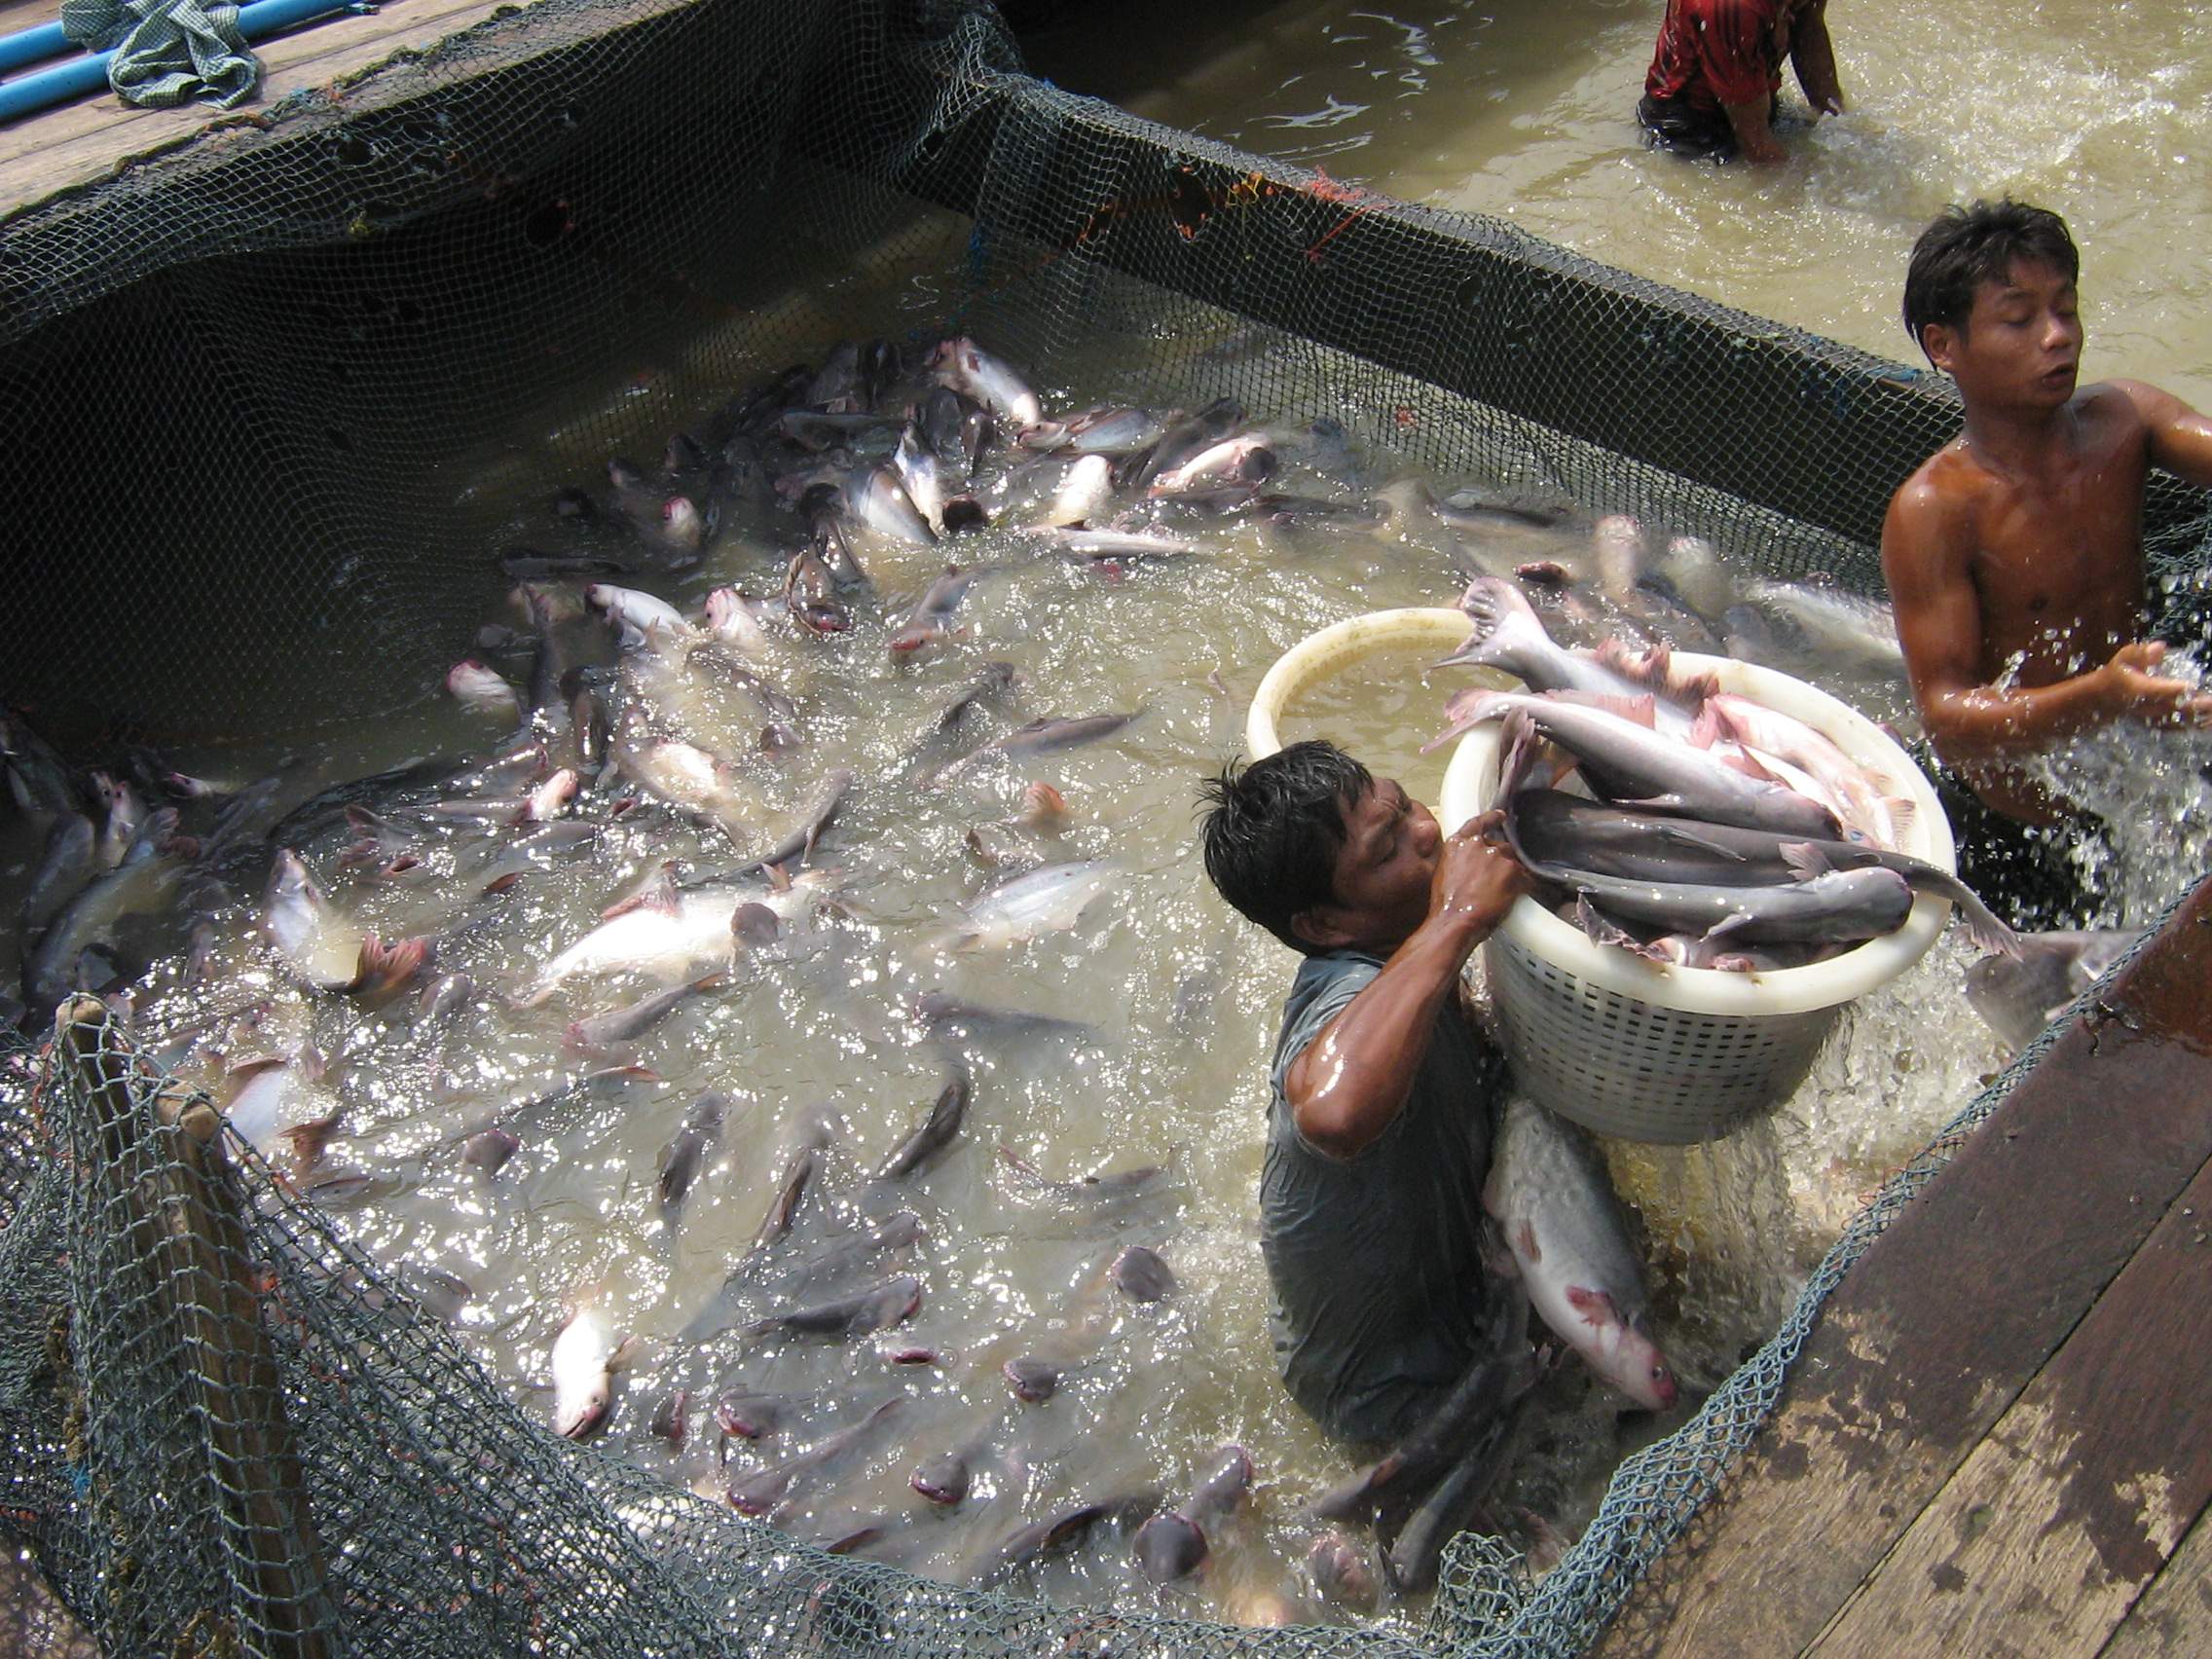 Workers handle farmed fish at a local farm. Photo: The Myanmar Times